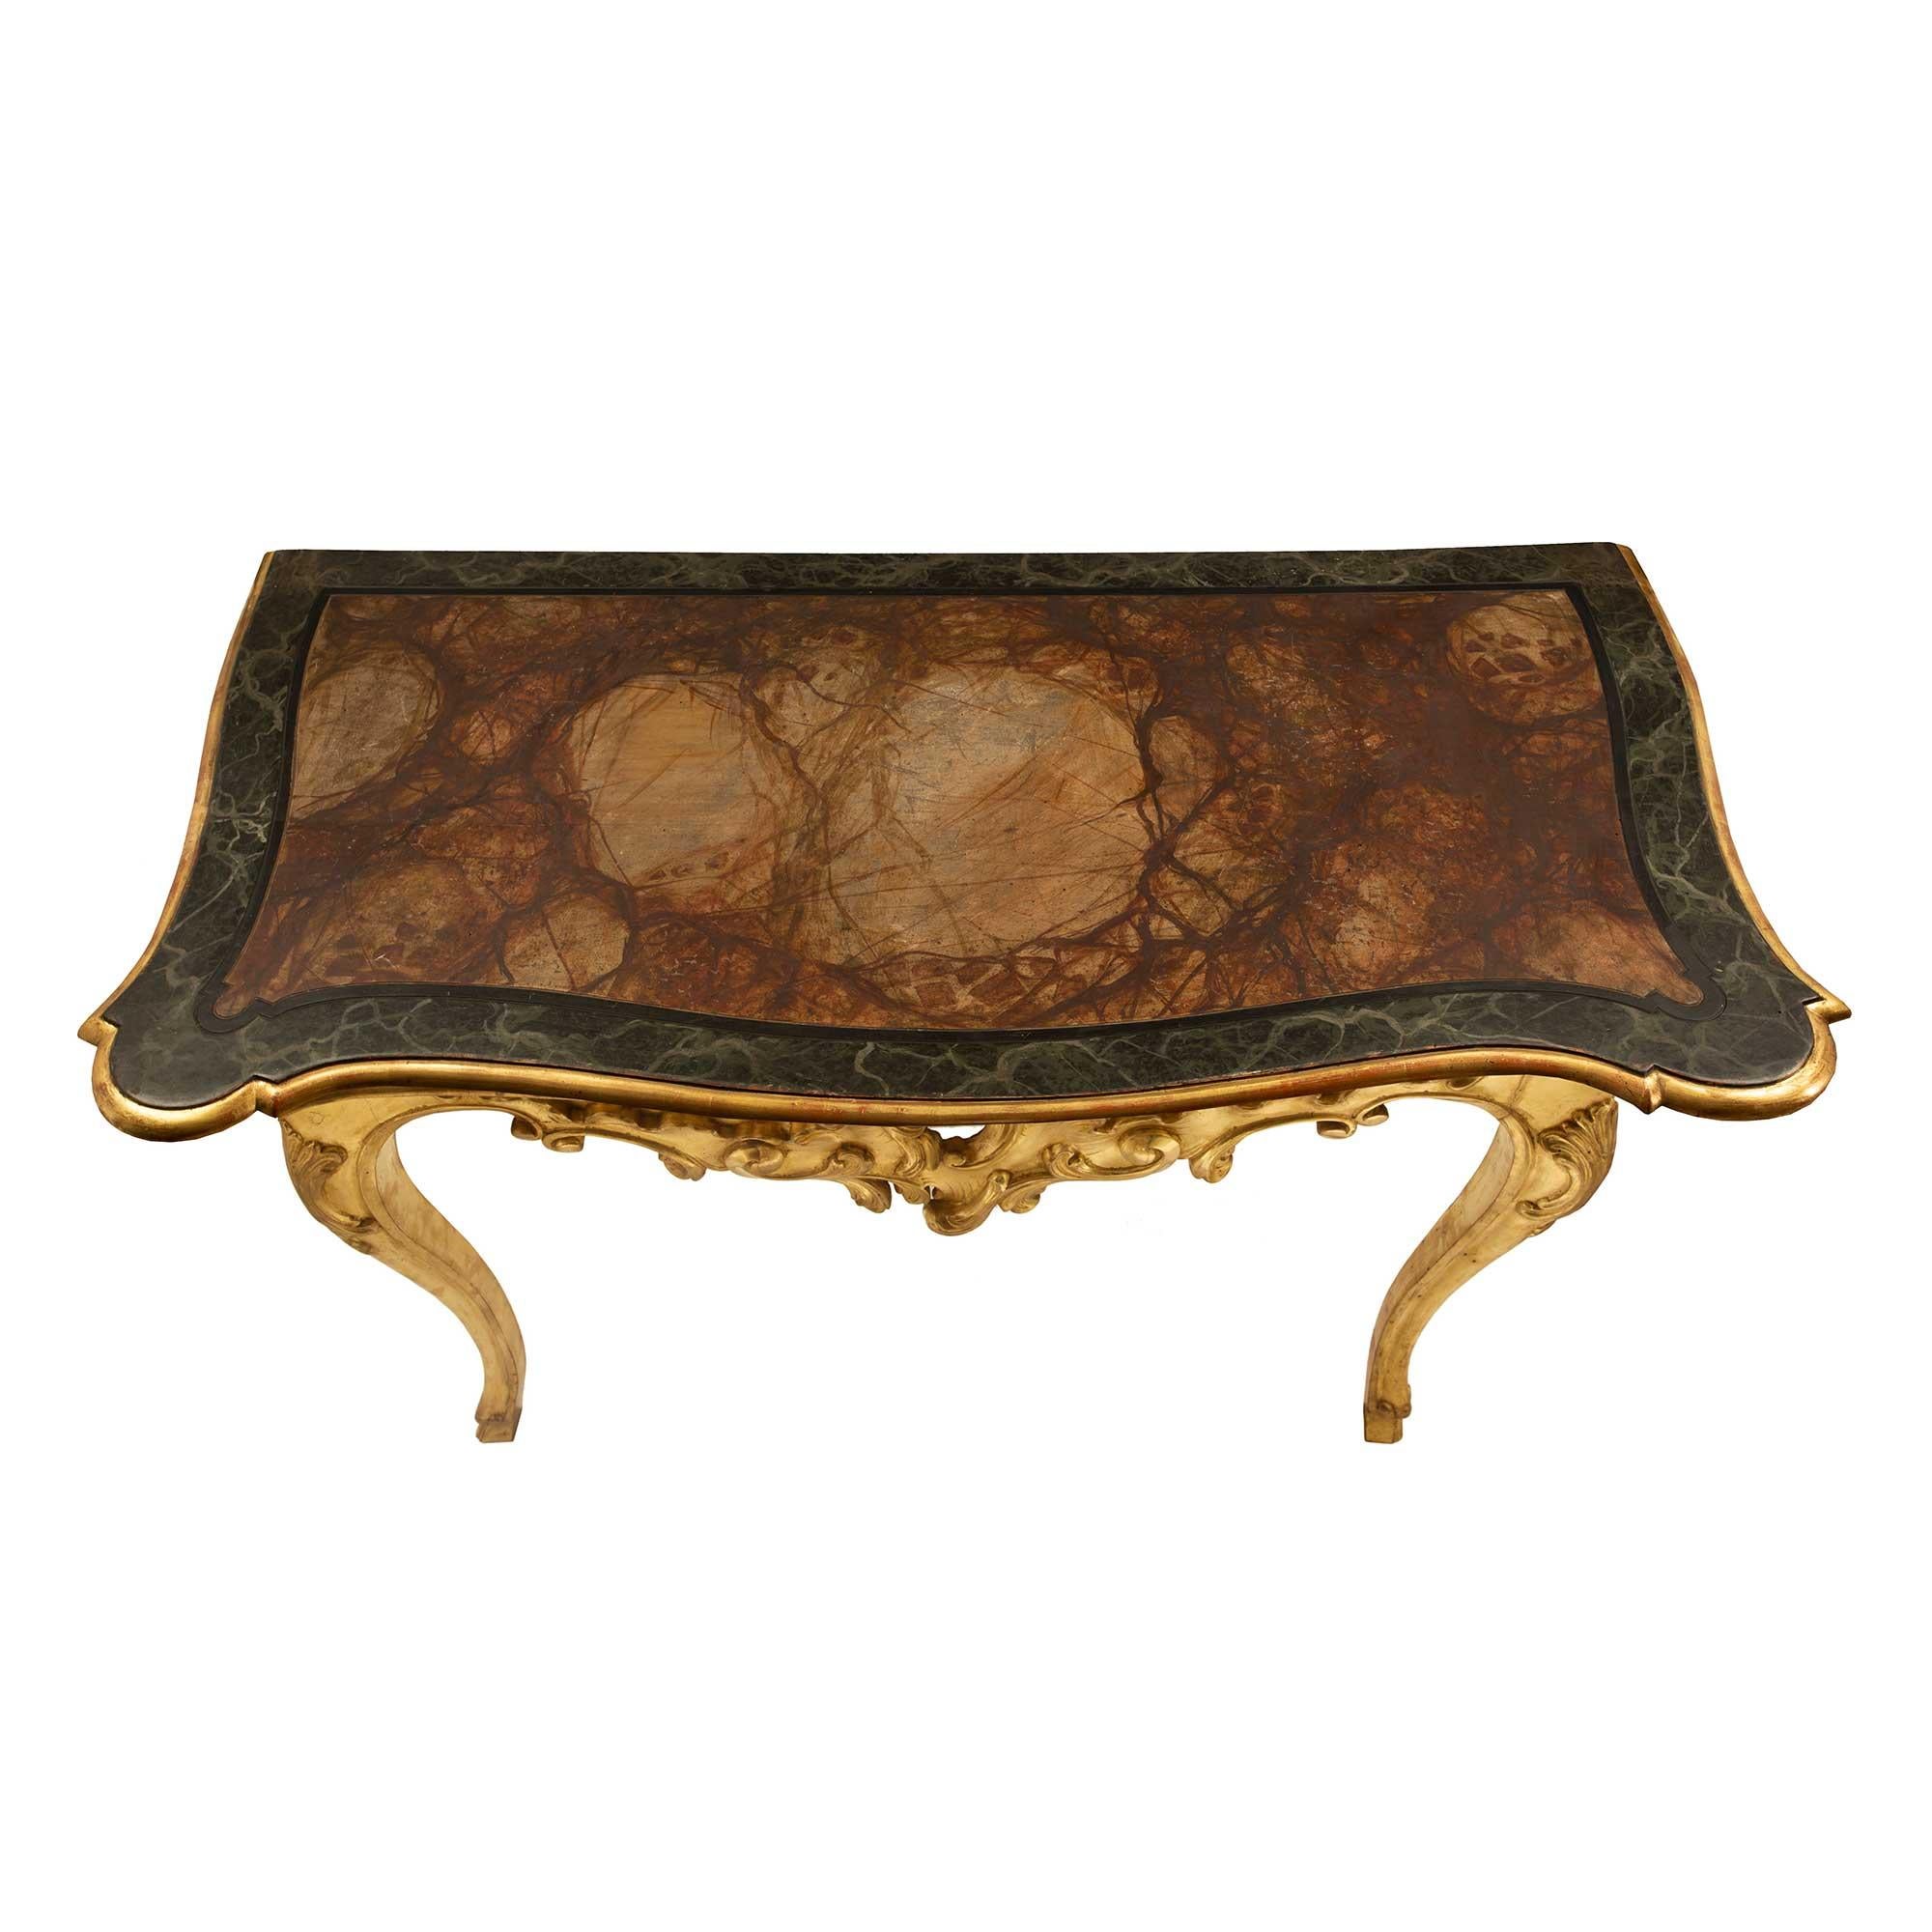 Painted Pair of Italian 18th Century Louis XV Period Giltwood and Faux Marble Consoles For Sale